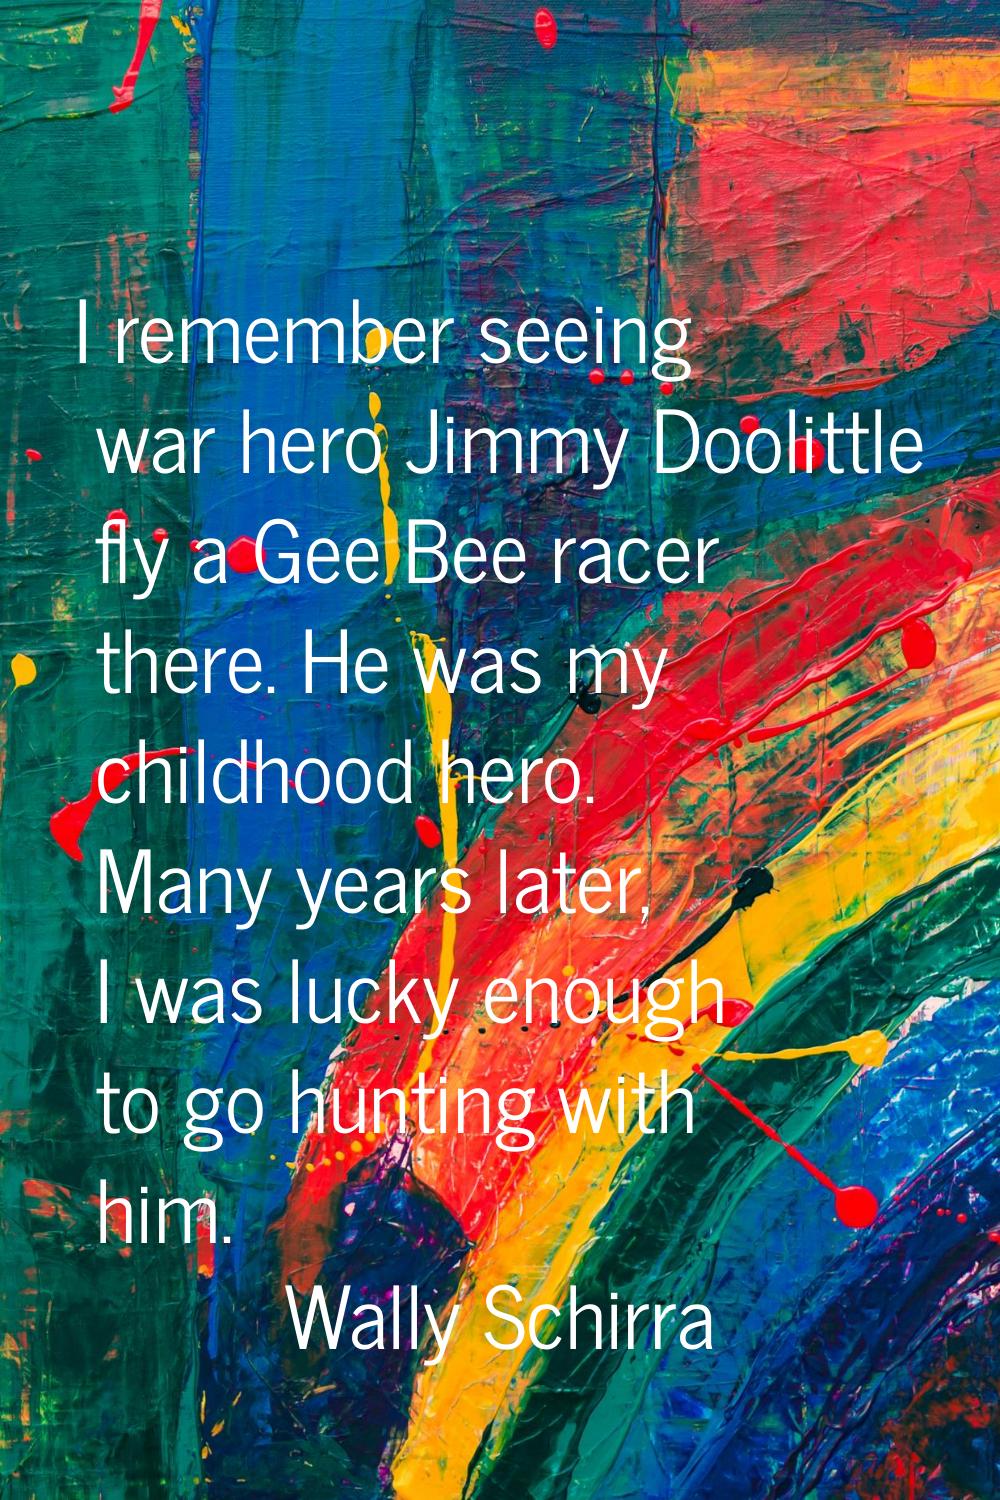 I remember seeing war hero Jimmy Doolittle fly a Gee Bee racer there. He was my childhood hero. Man